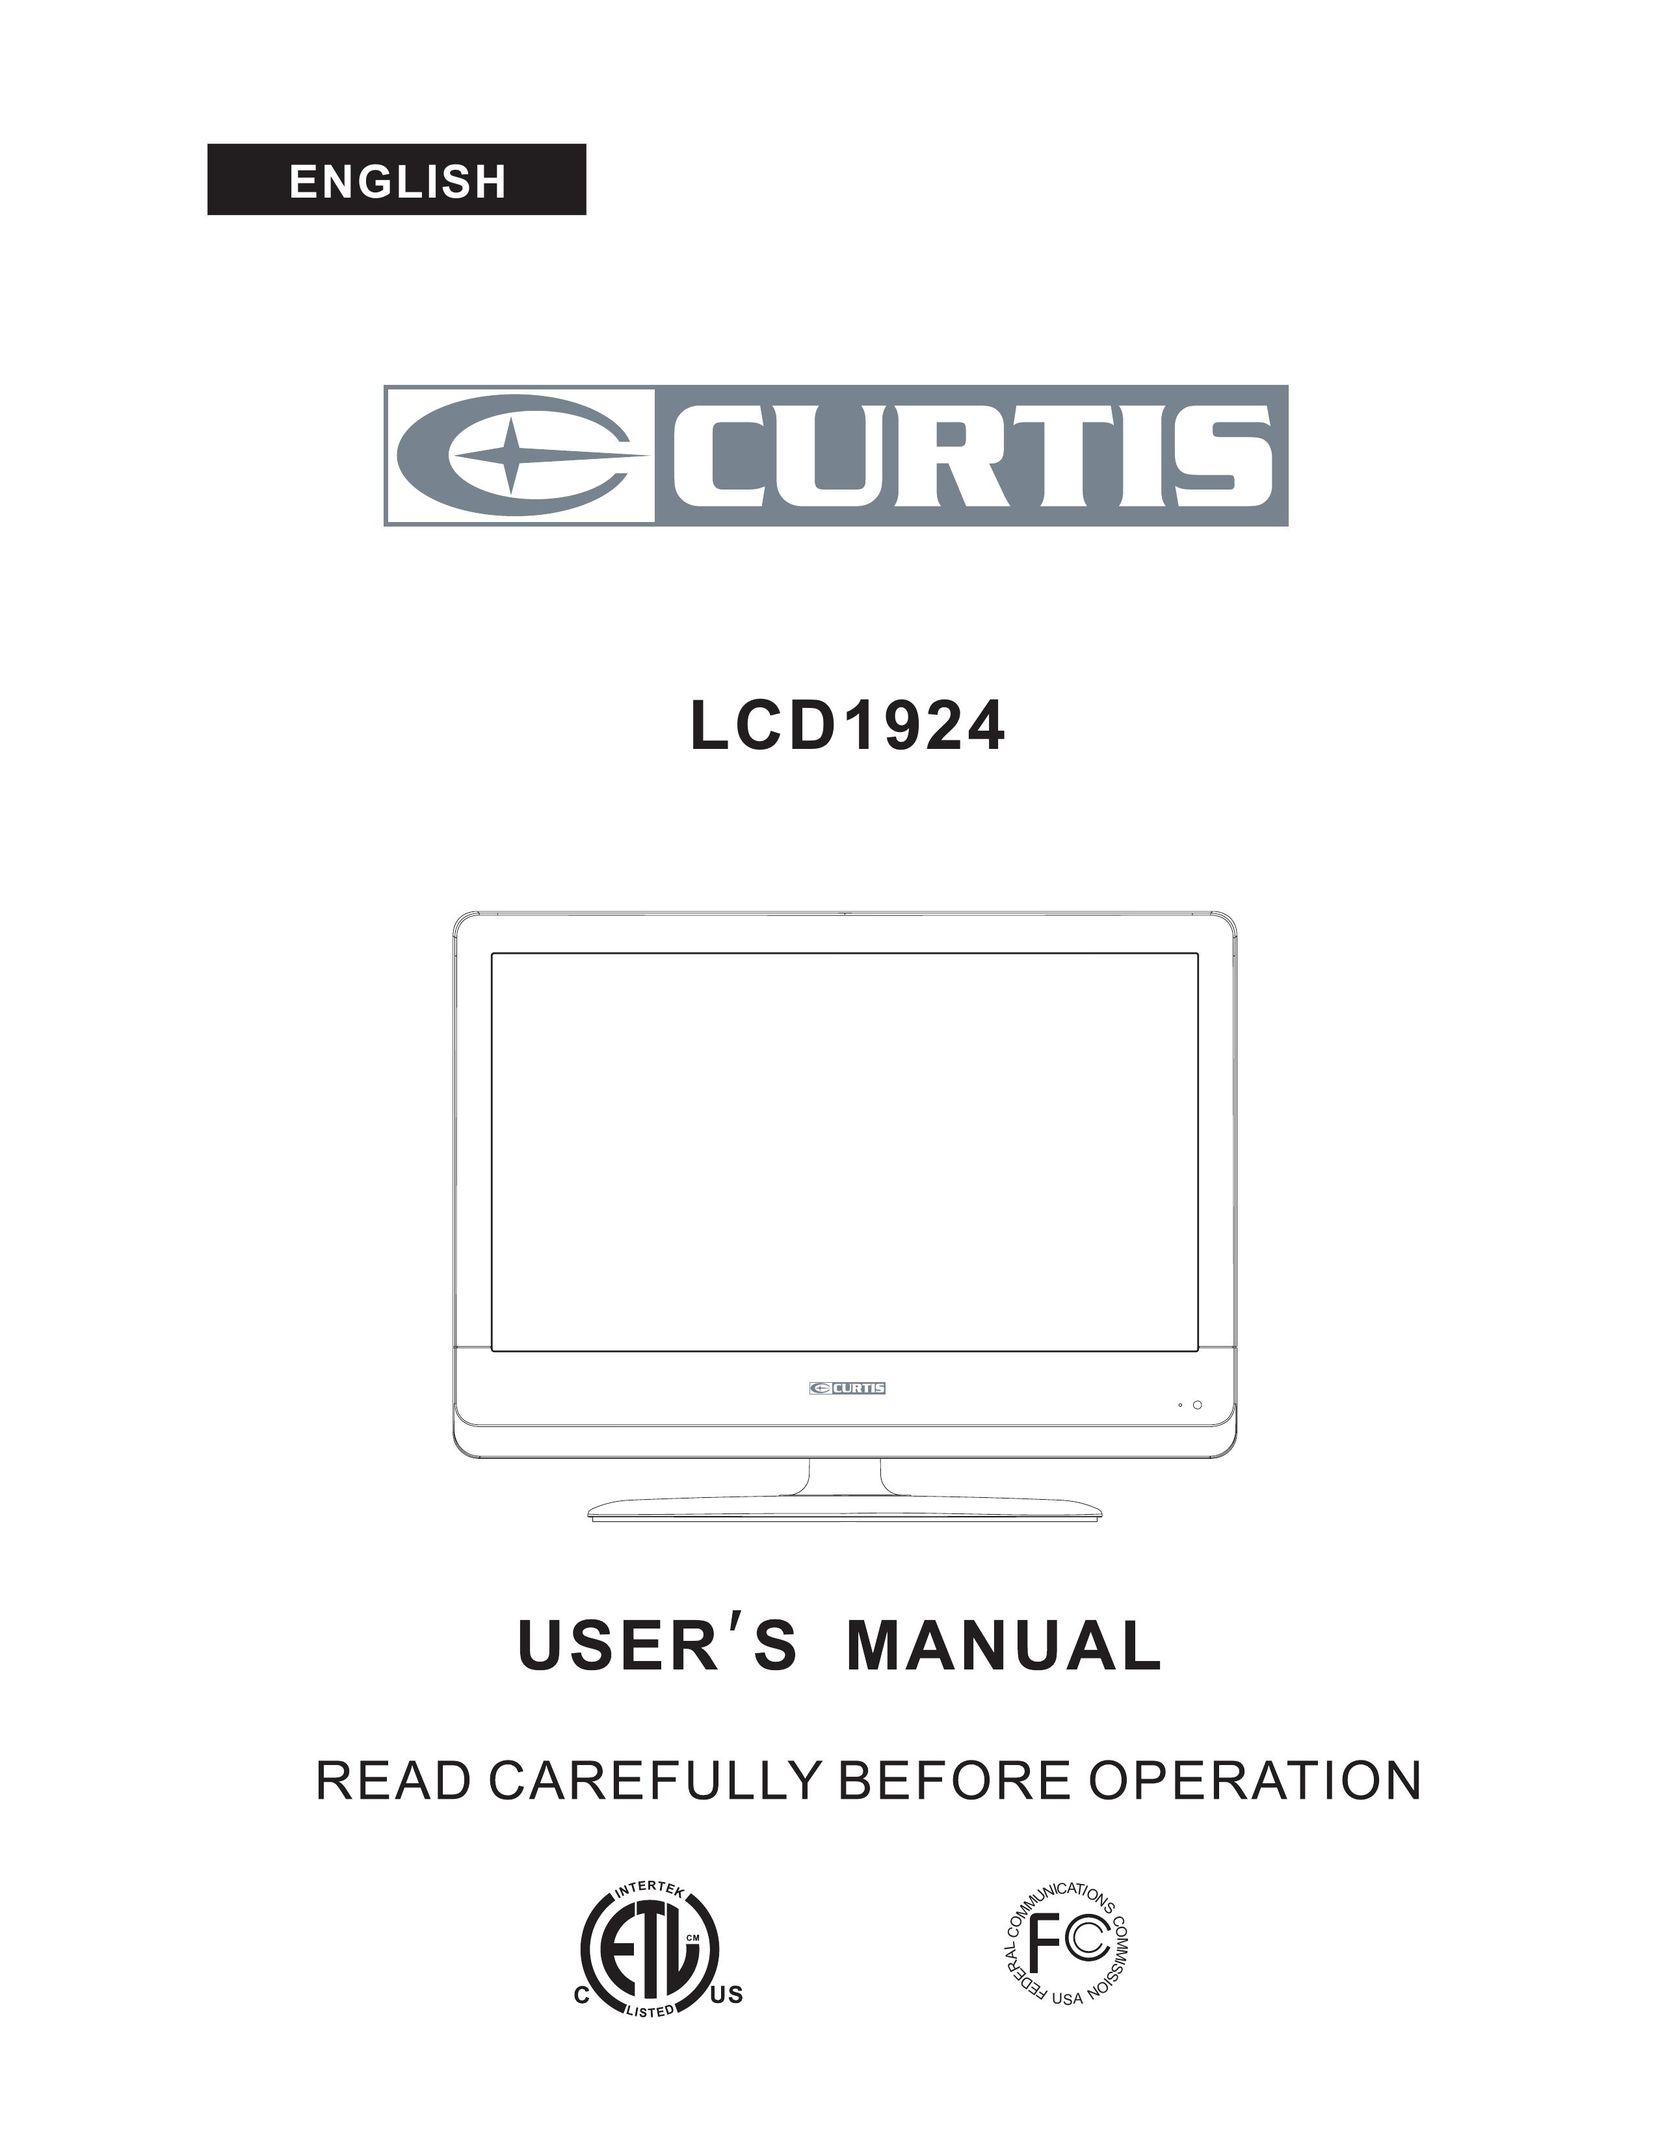 Curtis LCD1924 Flat Panel Television User Manual